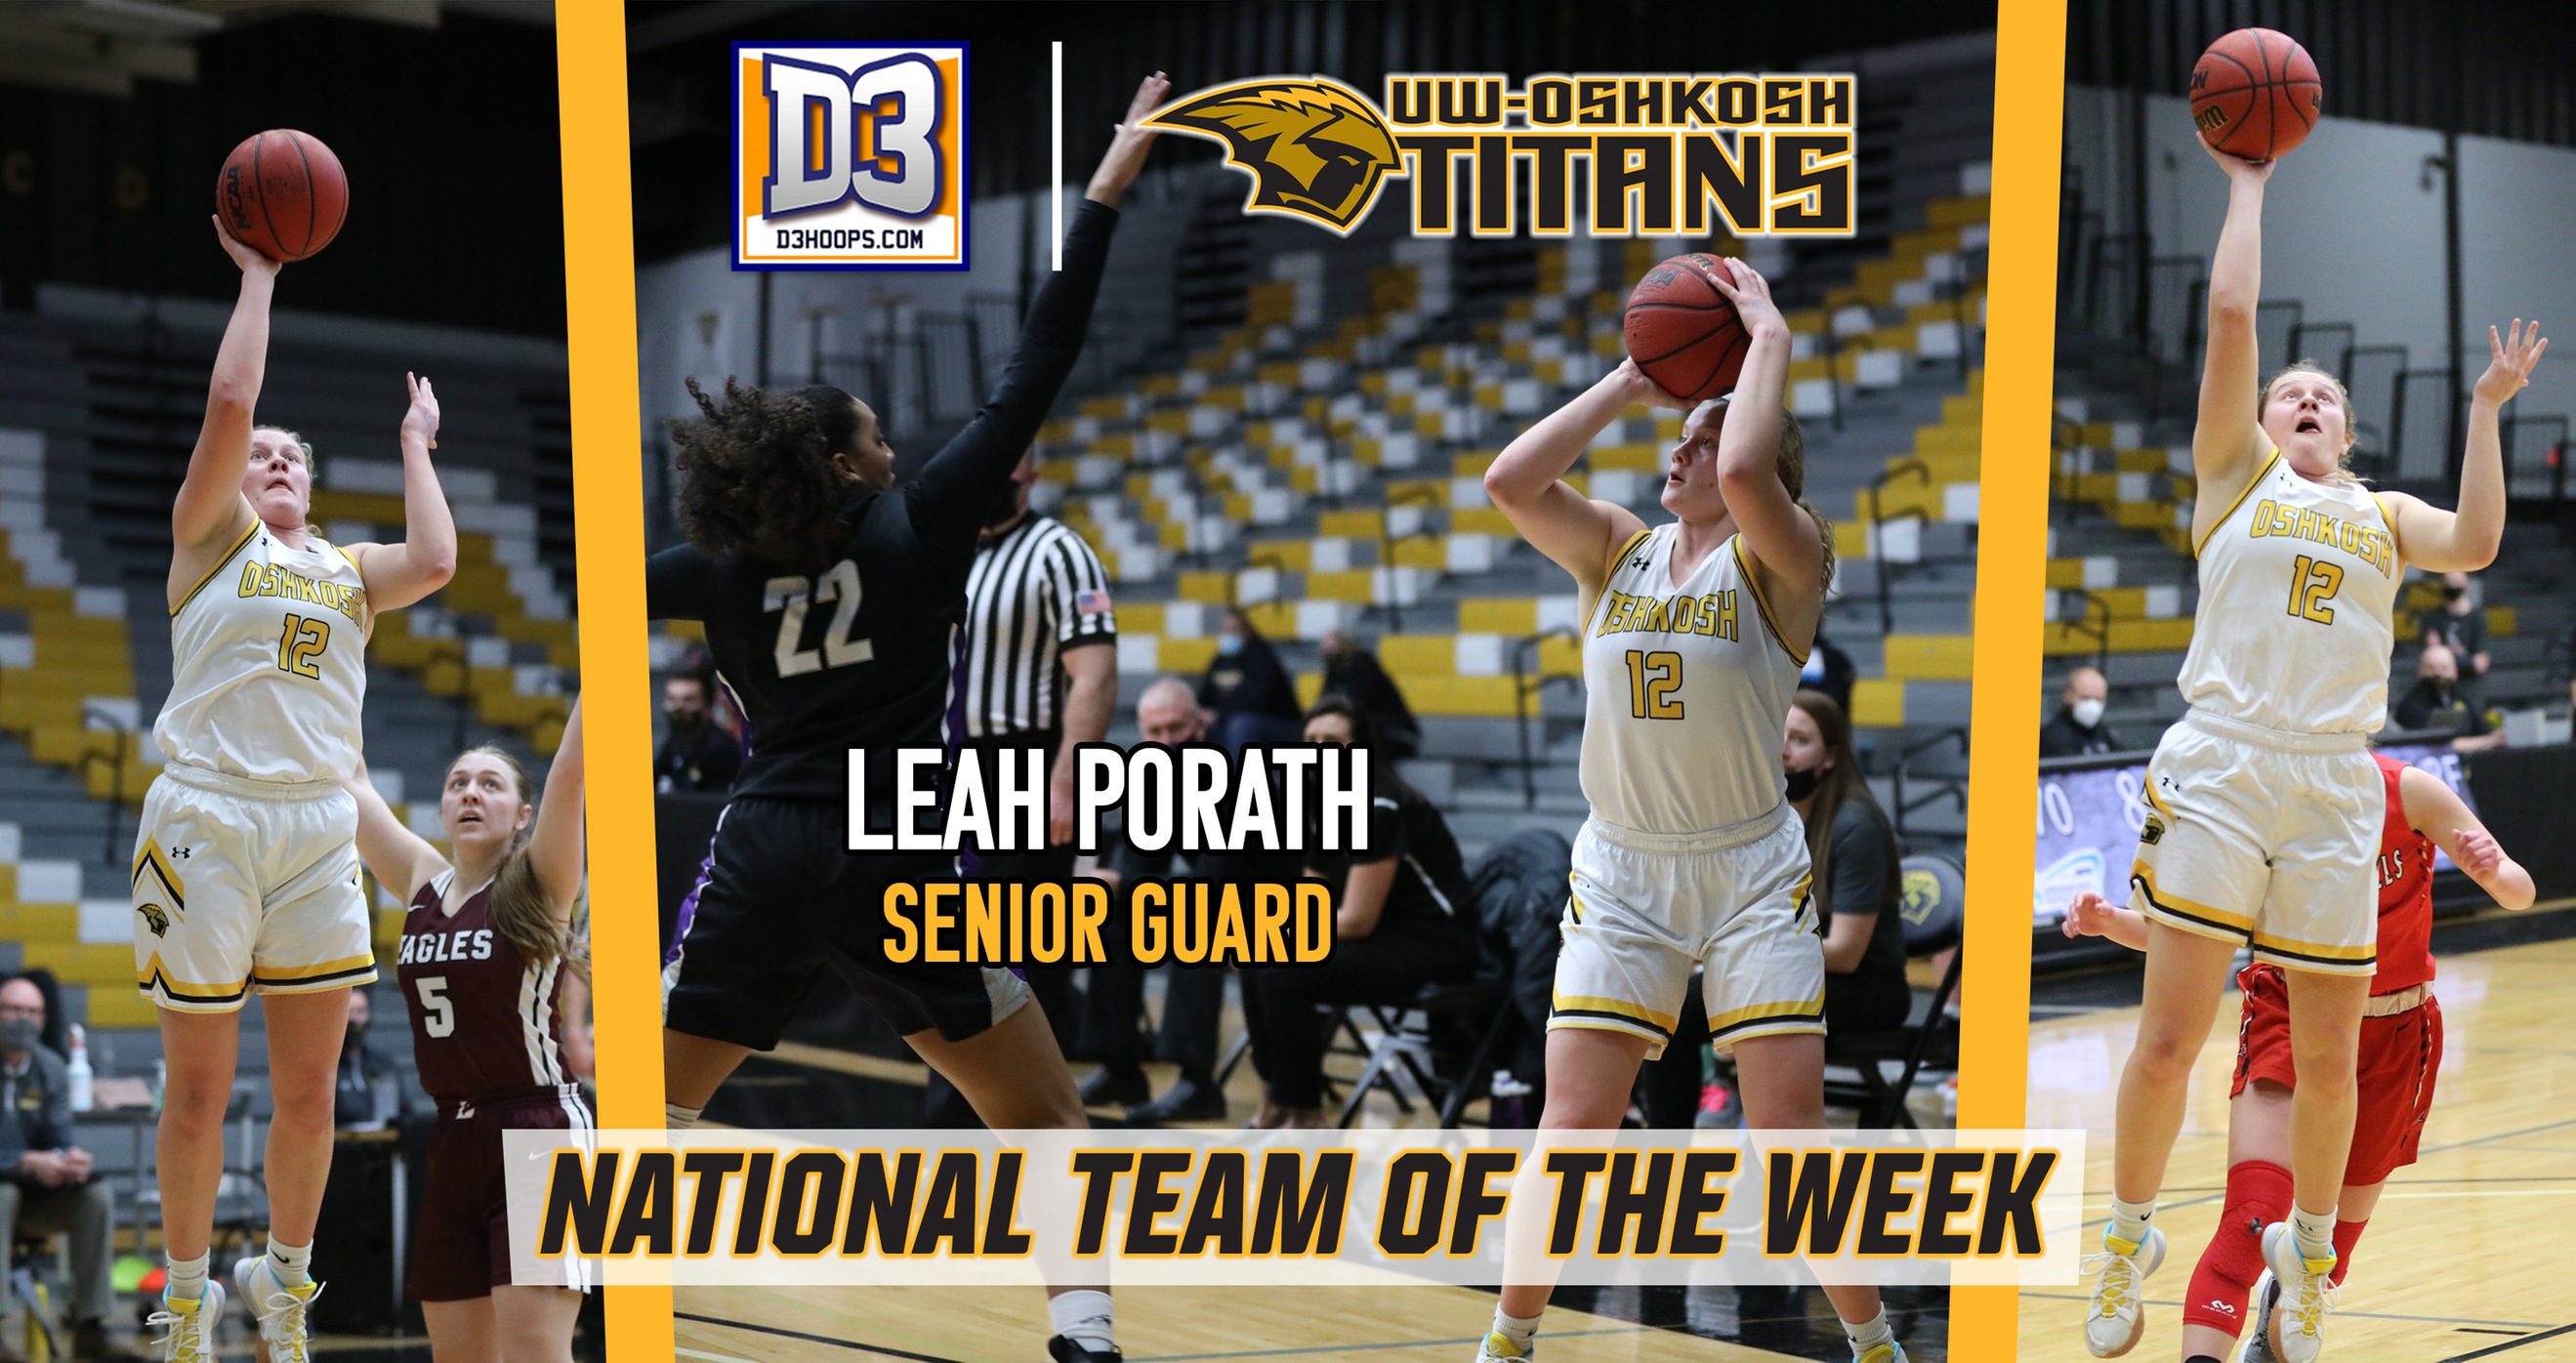 Porath Earns Another National Basketball Team Of The Week Award